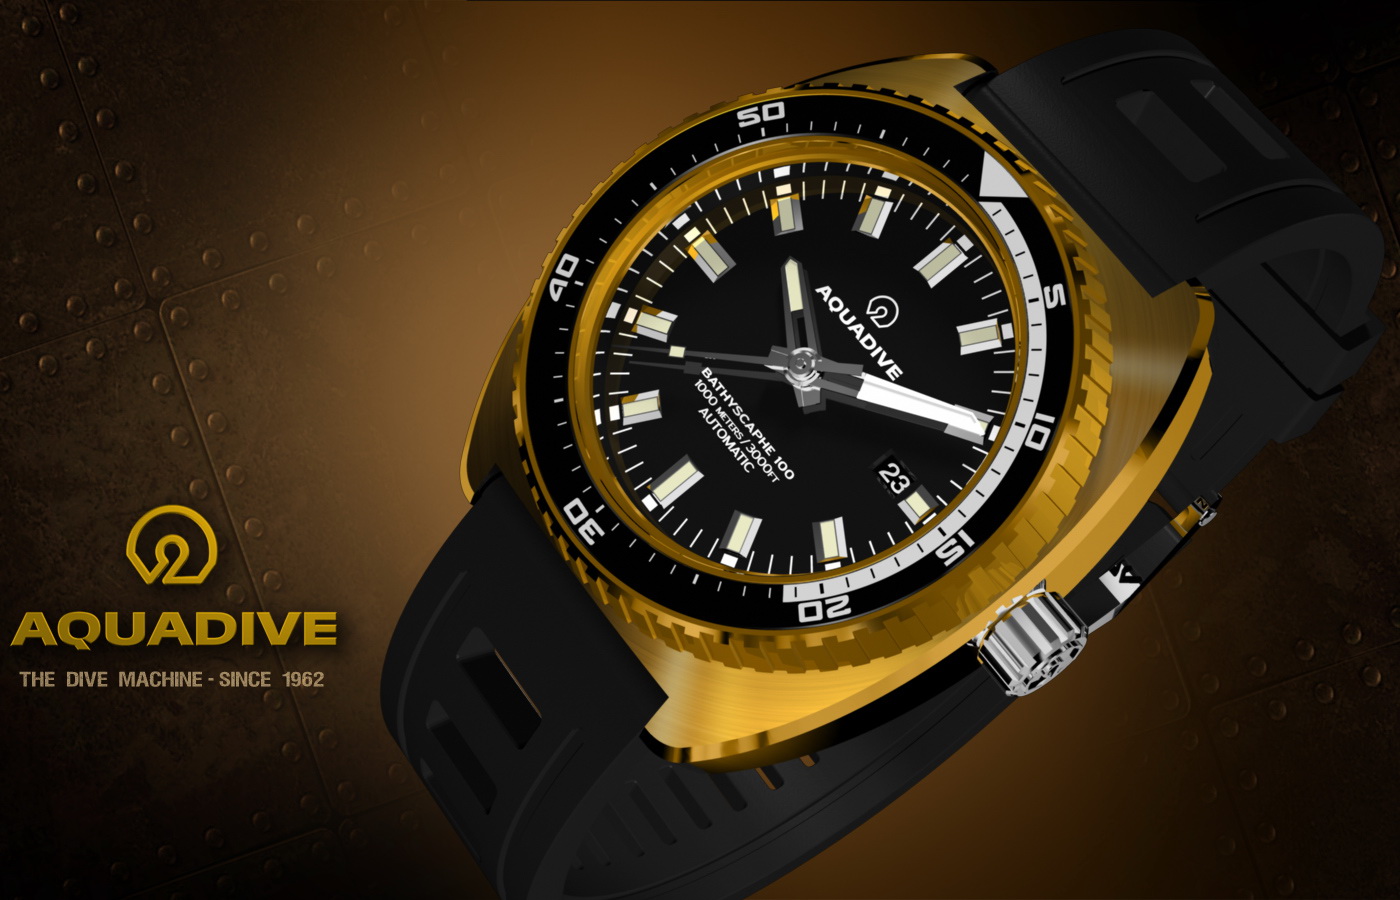 Aquadive Dive watch -strong water resistance